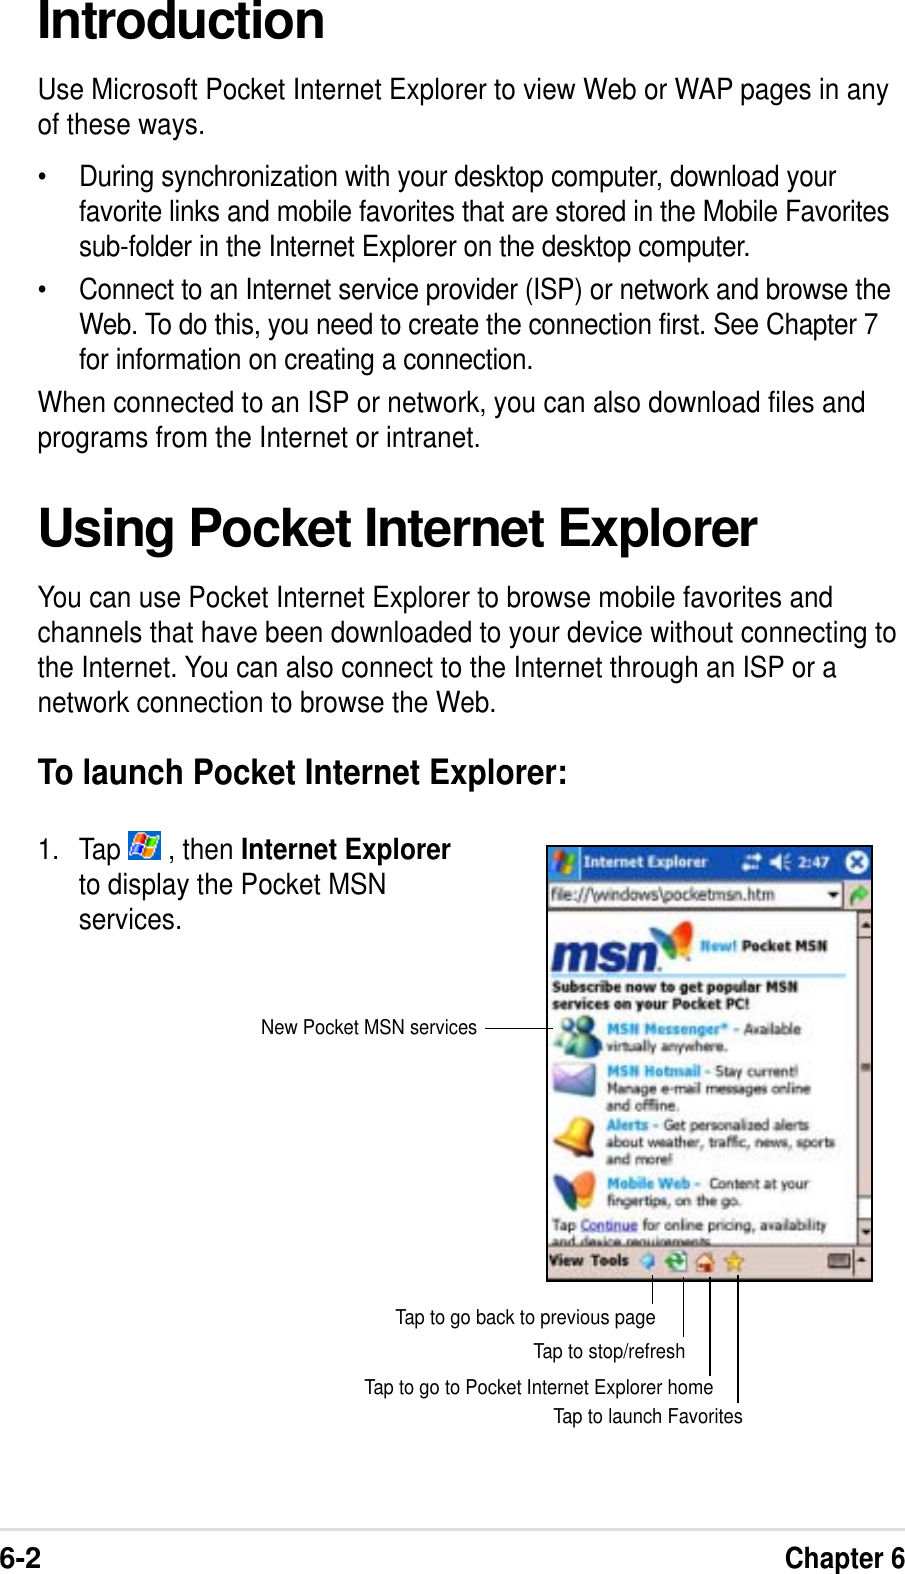 6-2Chapter 6IntroductionUse Microsoft Pocket Internet Explorer to view Web or WAP pages in anyof these ways.• During synchronization with your desktop computer, download yourfavorite links and mobile favorites that are stored in the Mobile Favoritessub-folder in the Internet Explorer on the desktop computer.• Connect to an Internet service provider (ISP) or network and browse theWeb. To do this, you need to create the connection first. See Chapter 7for information on creating a connection.When connected to an ISP or network, you can also download files andprograms from the Internet or intranet.Using Pocket Internet ExplorerYou can use Pocket Internet Explorer to browse mobile favorites andchannels that have been downloaded to your device without connecting tothe Internet. You can also connect to the Internet through an ISP or anetwork connection to browse the Web.To launch Pocket Internet Explorer:1. Tap   , then Internet Explorerto display the Pocket MSNservices.Tap to launch FavoritesTap to go to Pocket Internet Explorer homeTap to stop/refreshTap to go back to previous pageNew Pocket MSN services